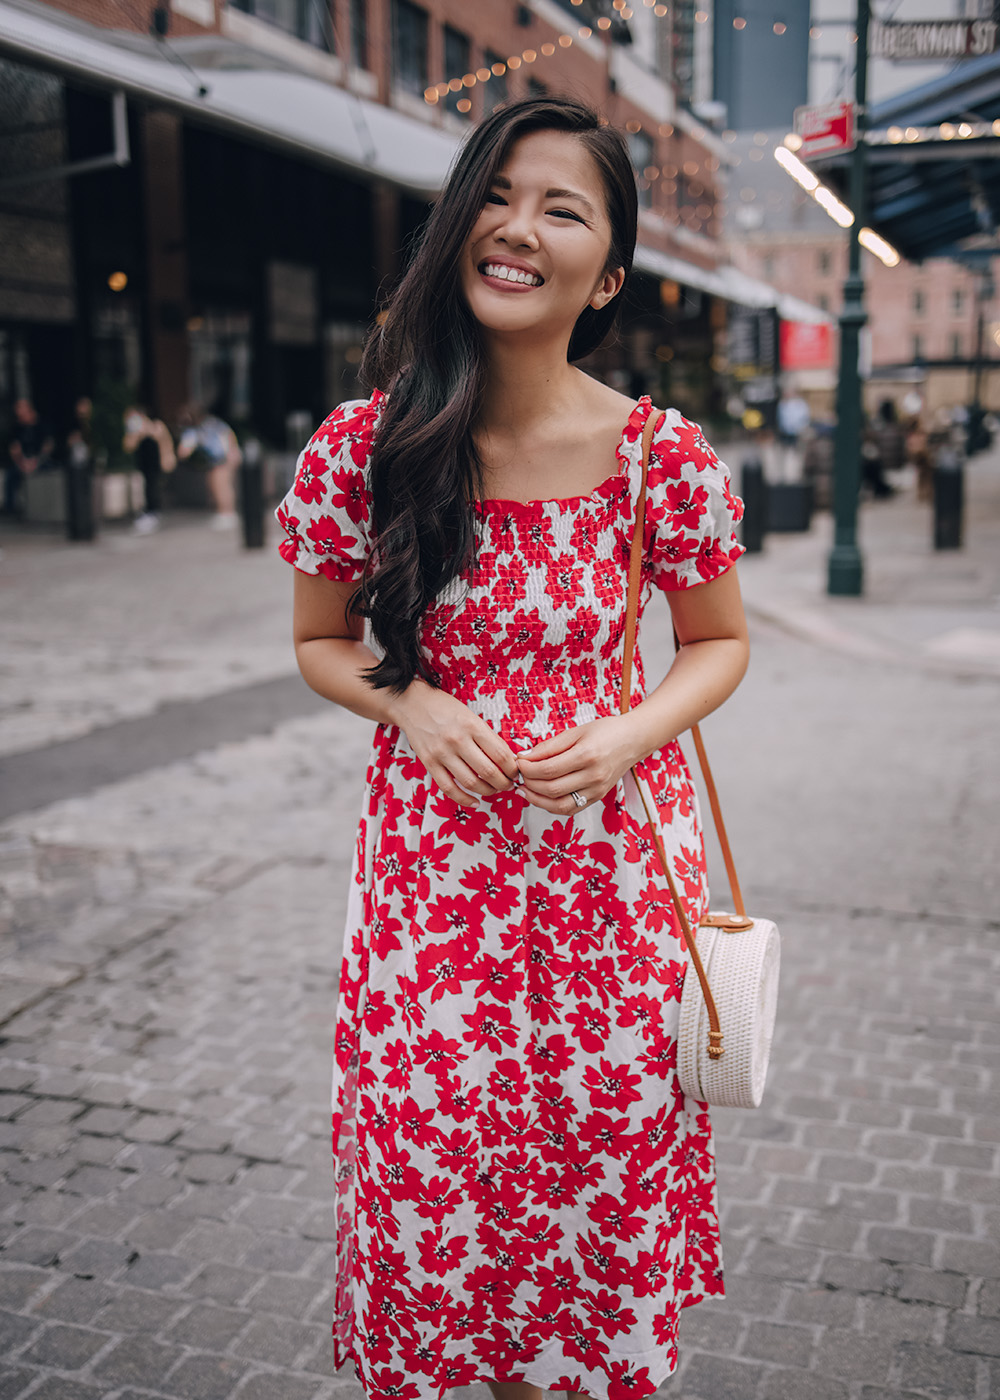 Feminine & Floral for 4th of July – Skirt The Rules